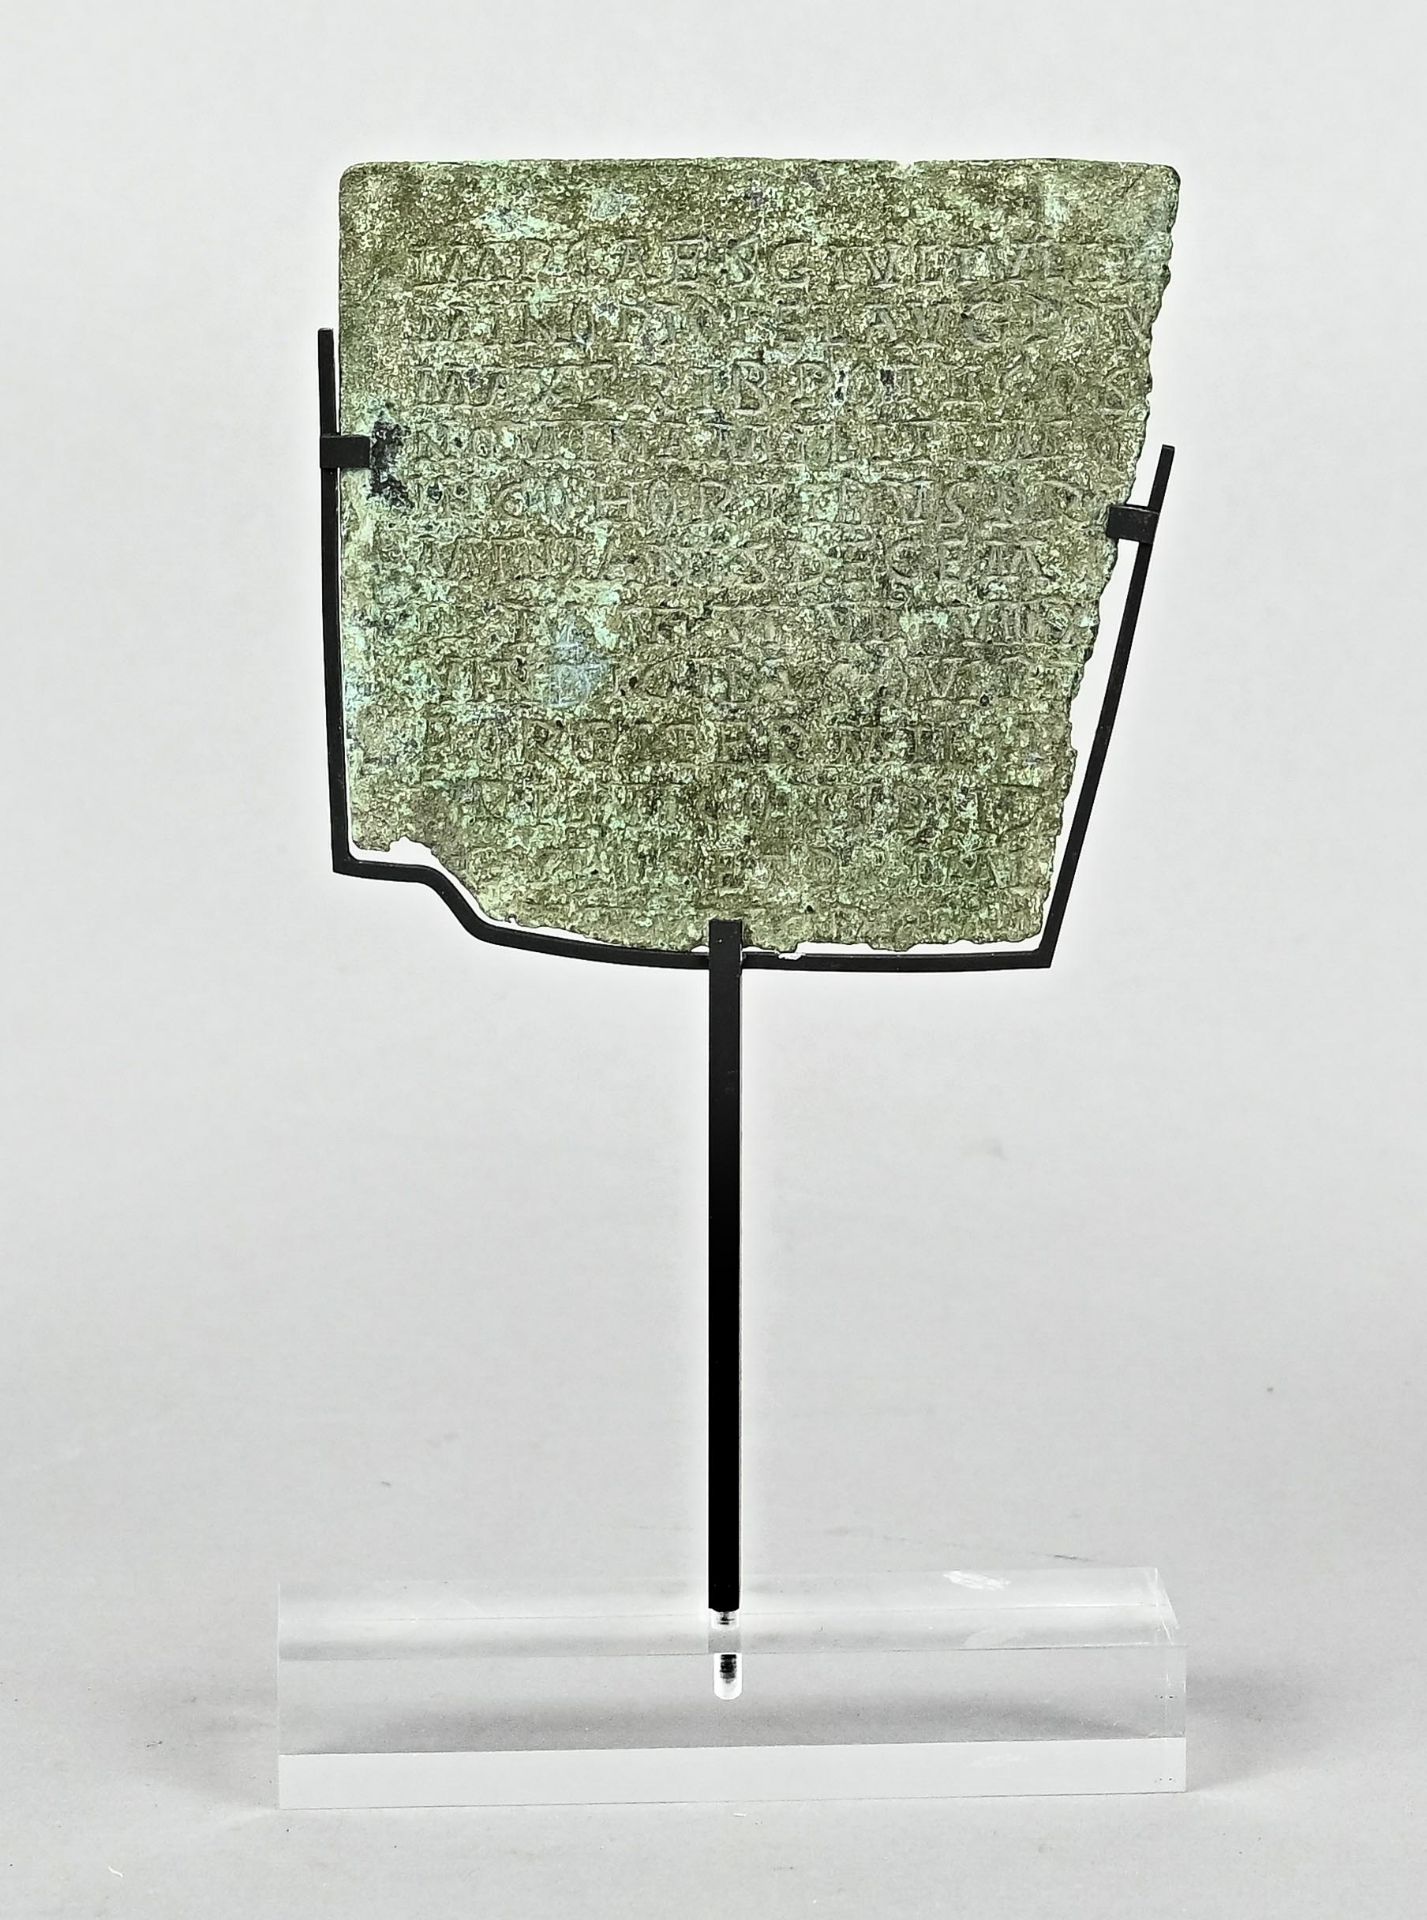 310 (3-123) Military Diploma, Roman, 235 - 238 AD, This is probably a military diploma of Maximinus